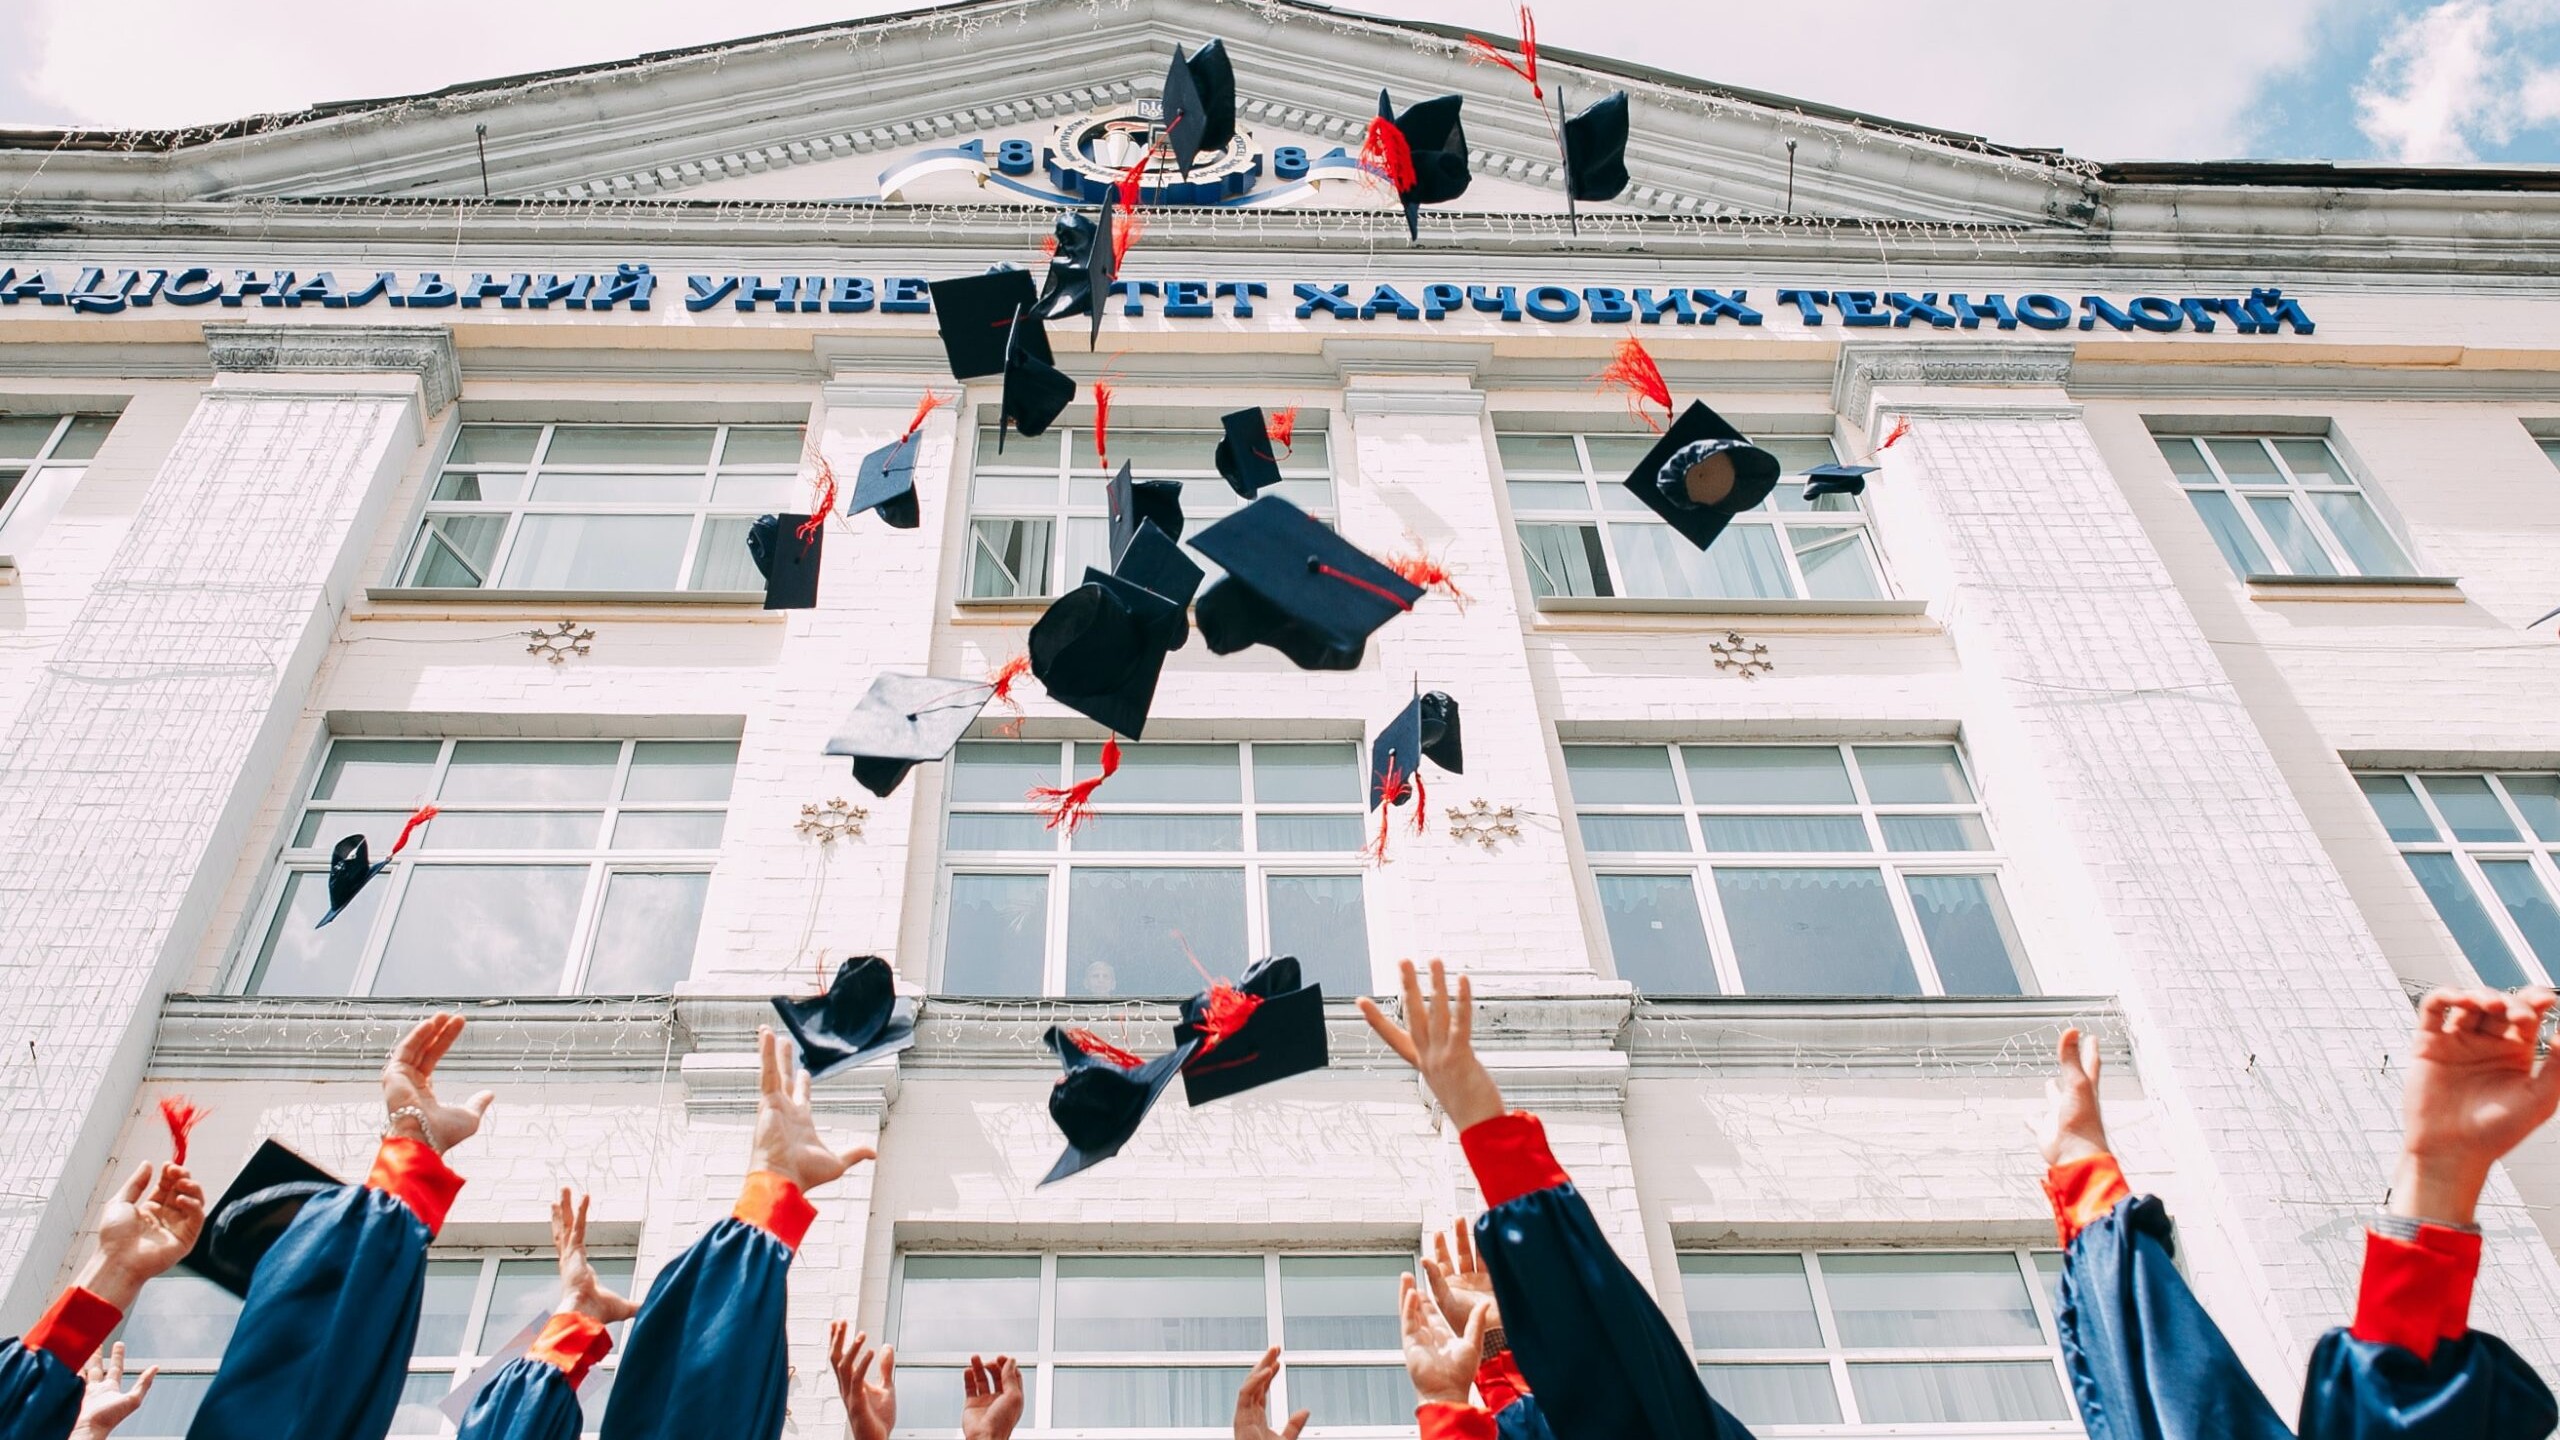 Kids throwing graduation hats Infront of a school for a graduation party event.